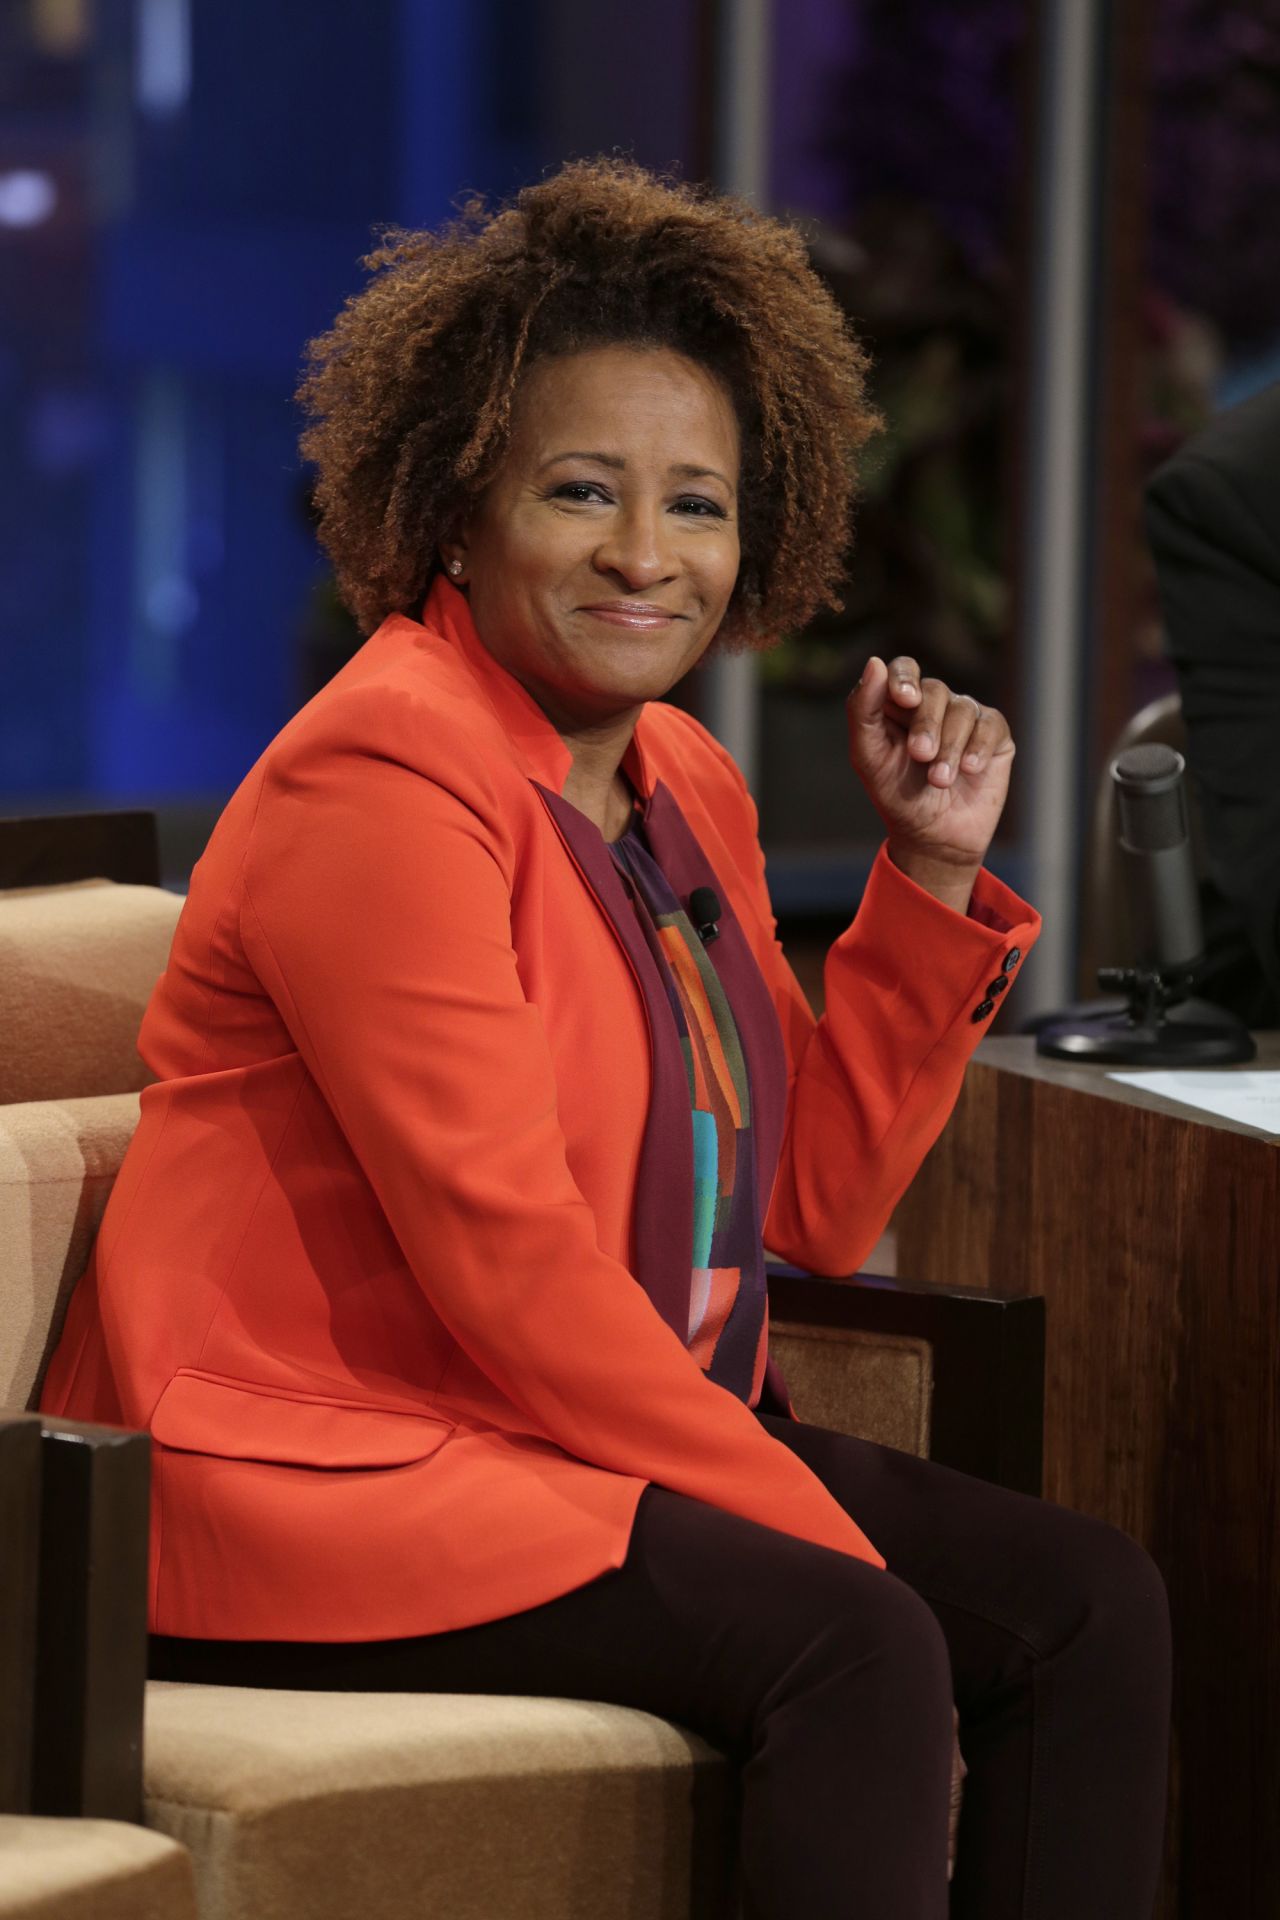 Emmy Award-winning television writer, comedian and actor Wanda Sykes is known for her witty and biting stage work. Born in Portsmouth, Virginia, on March 7, 1964, Sykes worked at the National Security Agency after college. She became the first African-American woman and openly gay entertainer to headline the White House Correspondents' Association dinner.